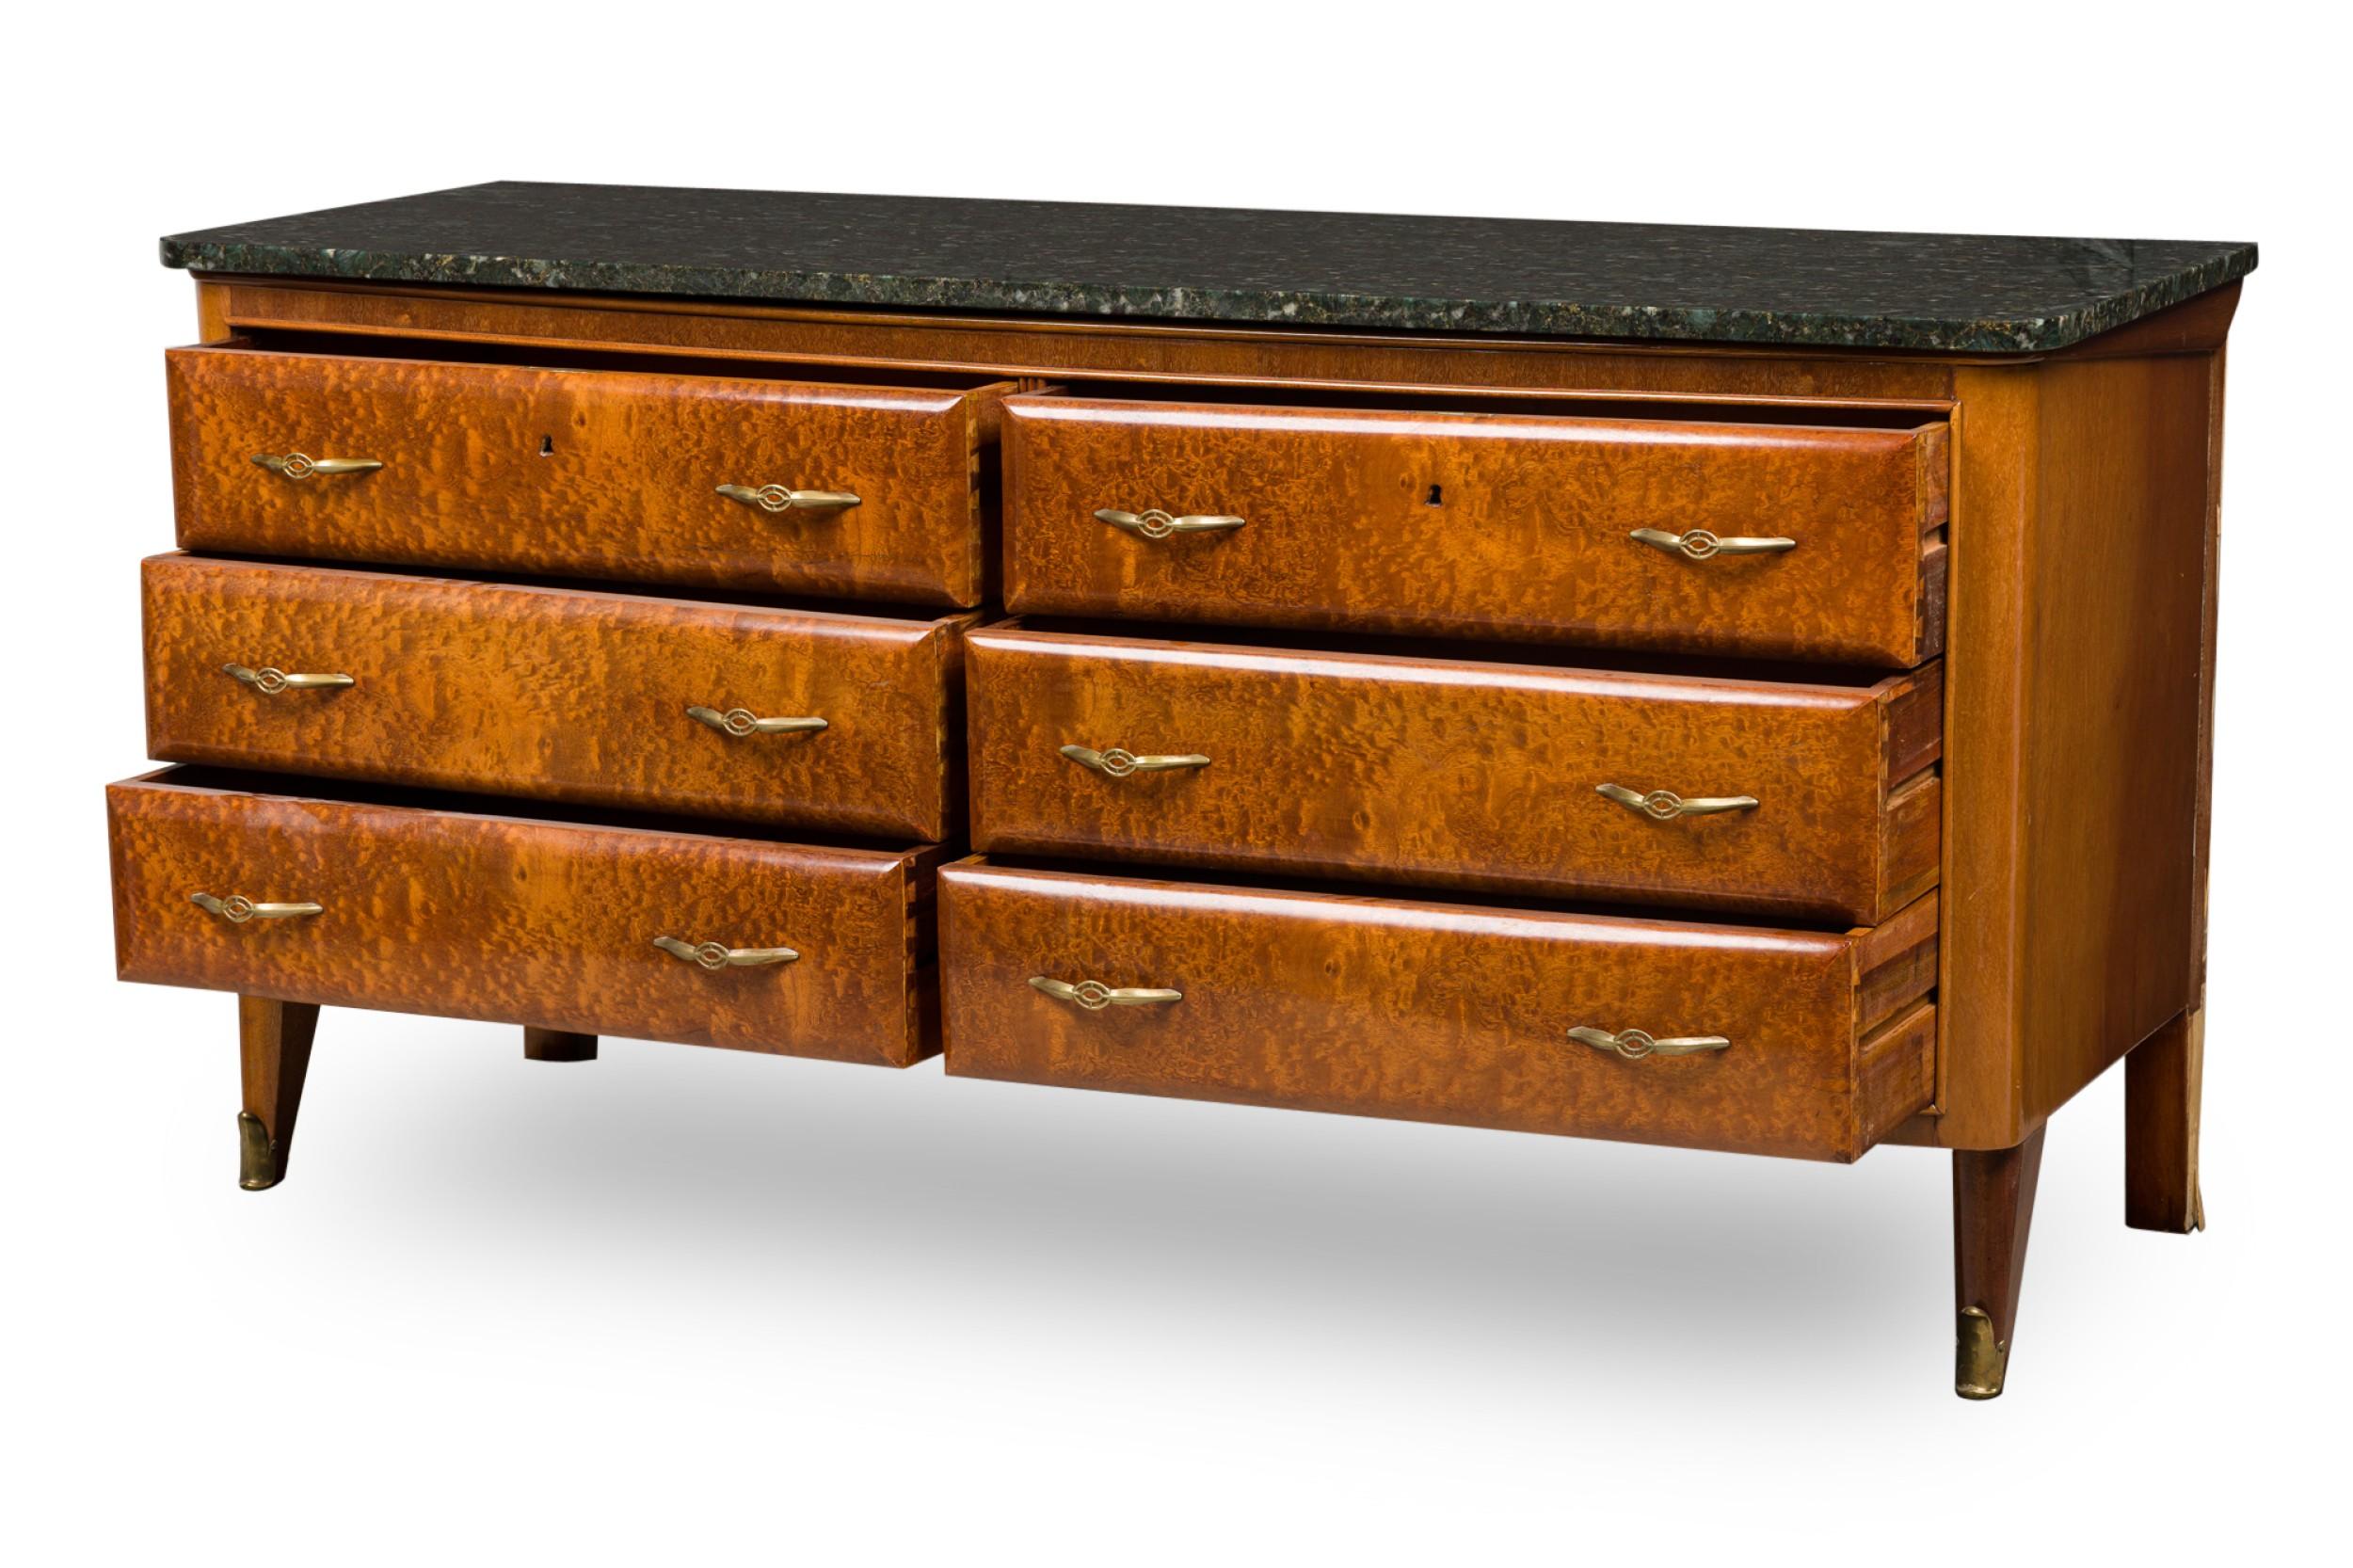 Brass Paolo Buffa Italian Mid-Century Mahogany and Marble 6-Drawer Dresser / Sideboard For Sale